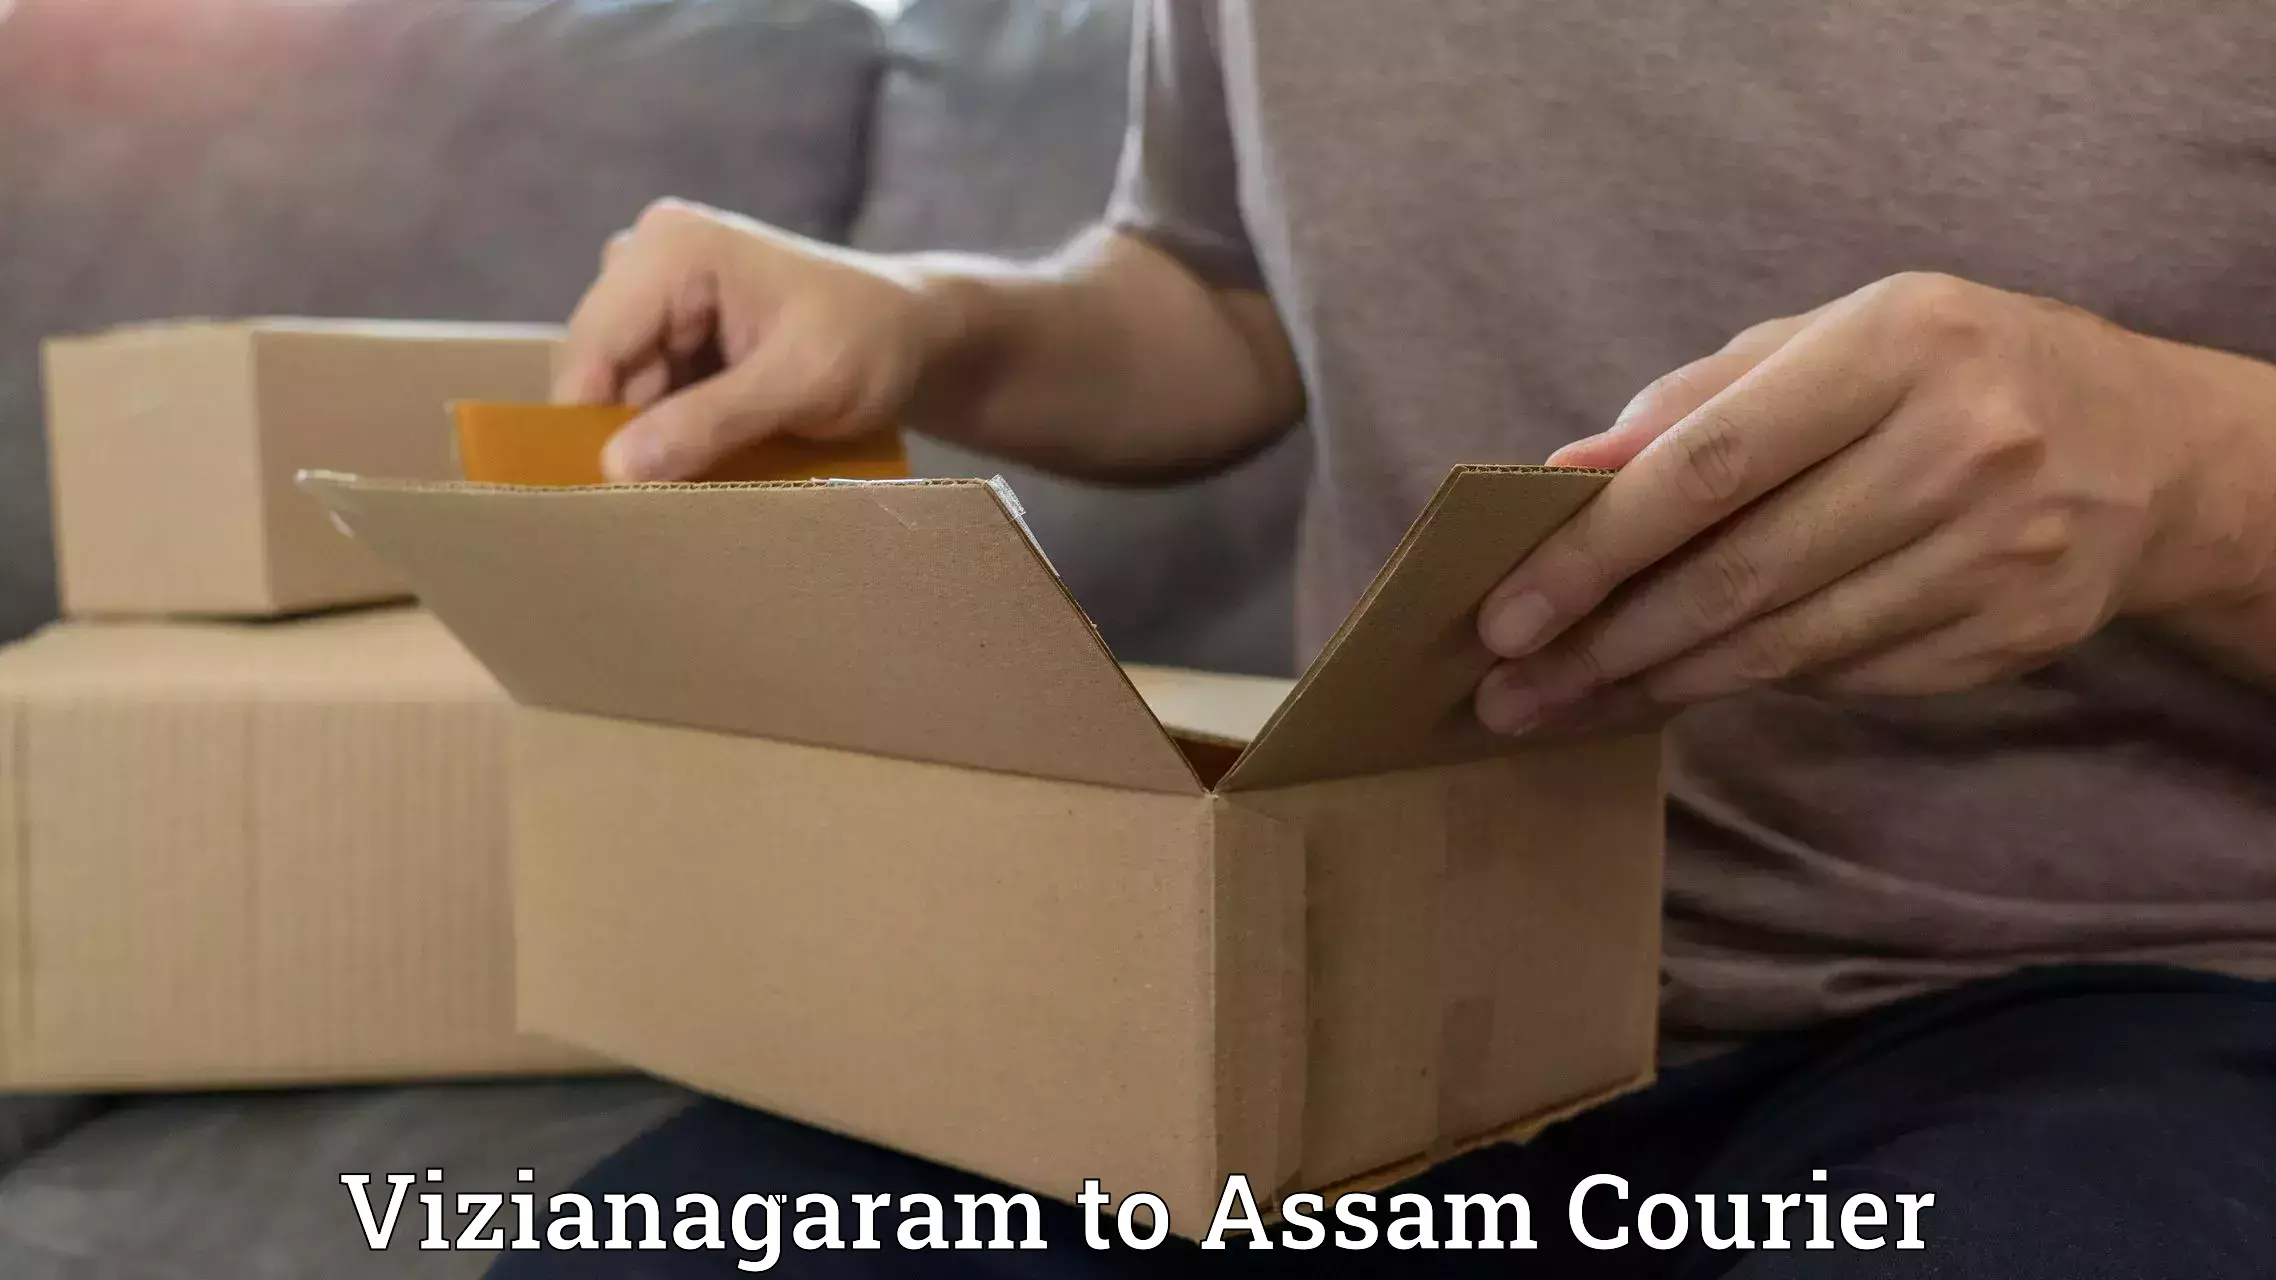 Easy access courier services in Vizianagaram to Assam